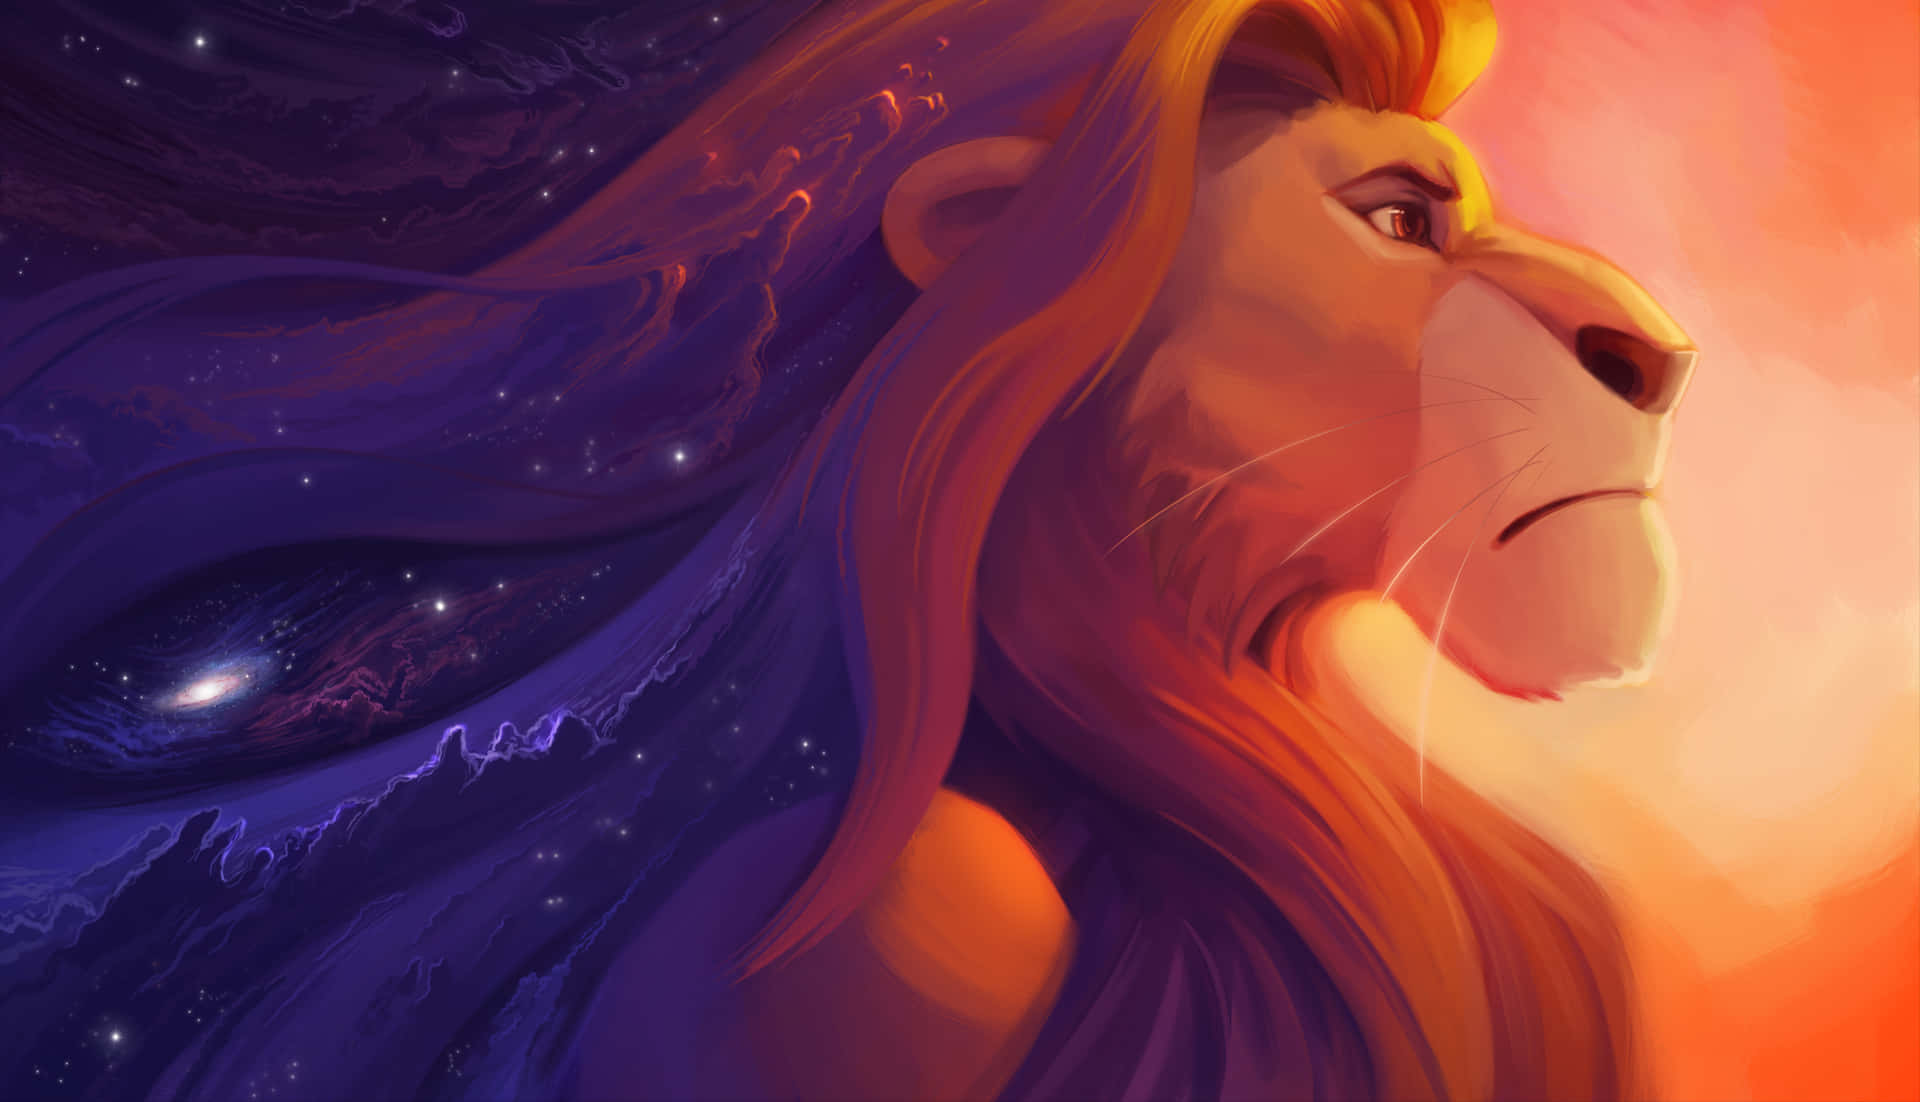 Feel the magic of the Circle of Life with this Lion King Aesthetic Wallpaper